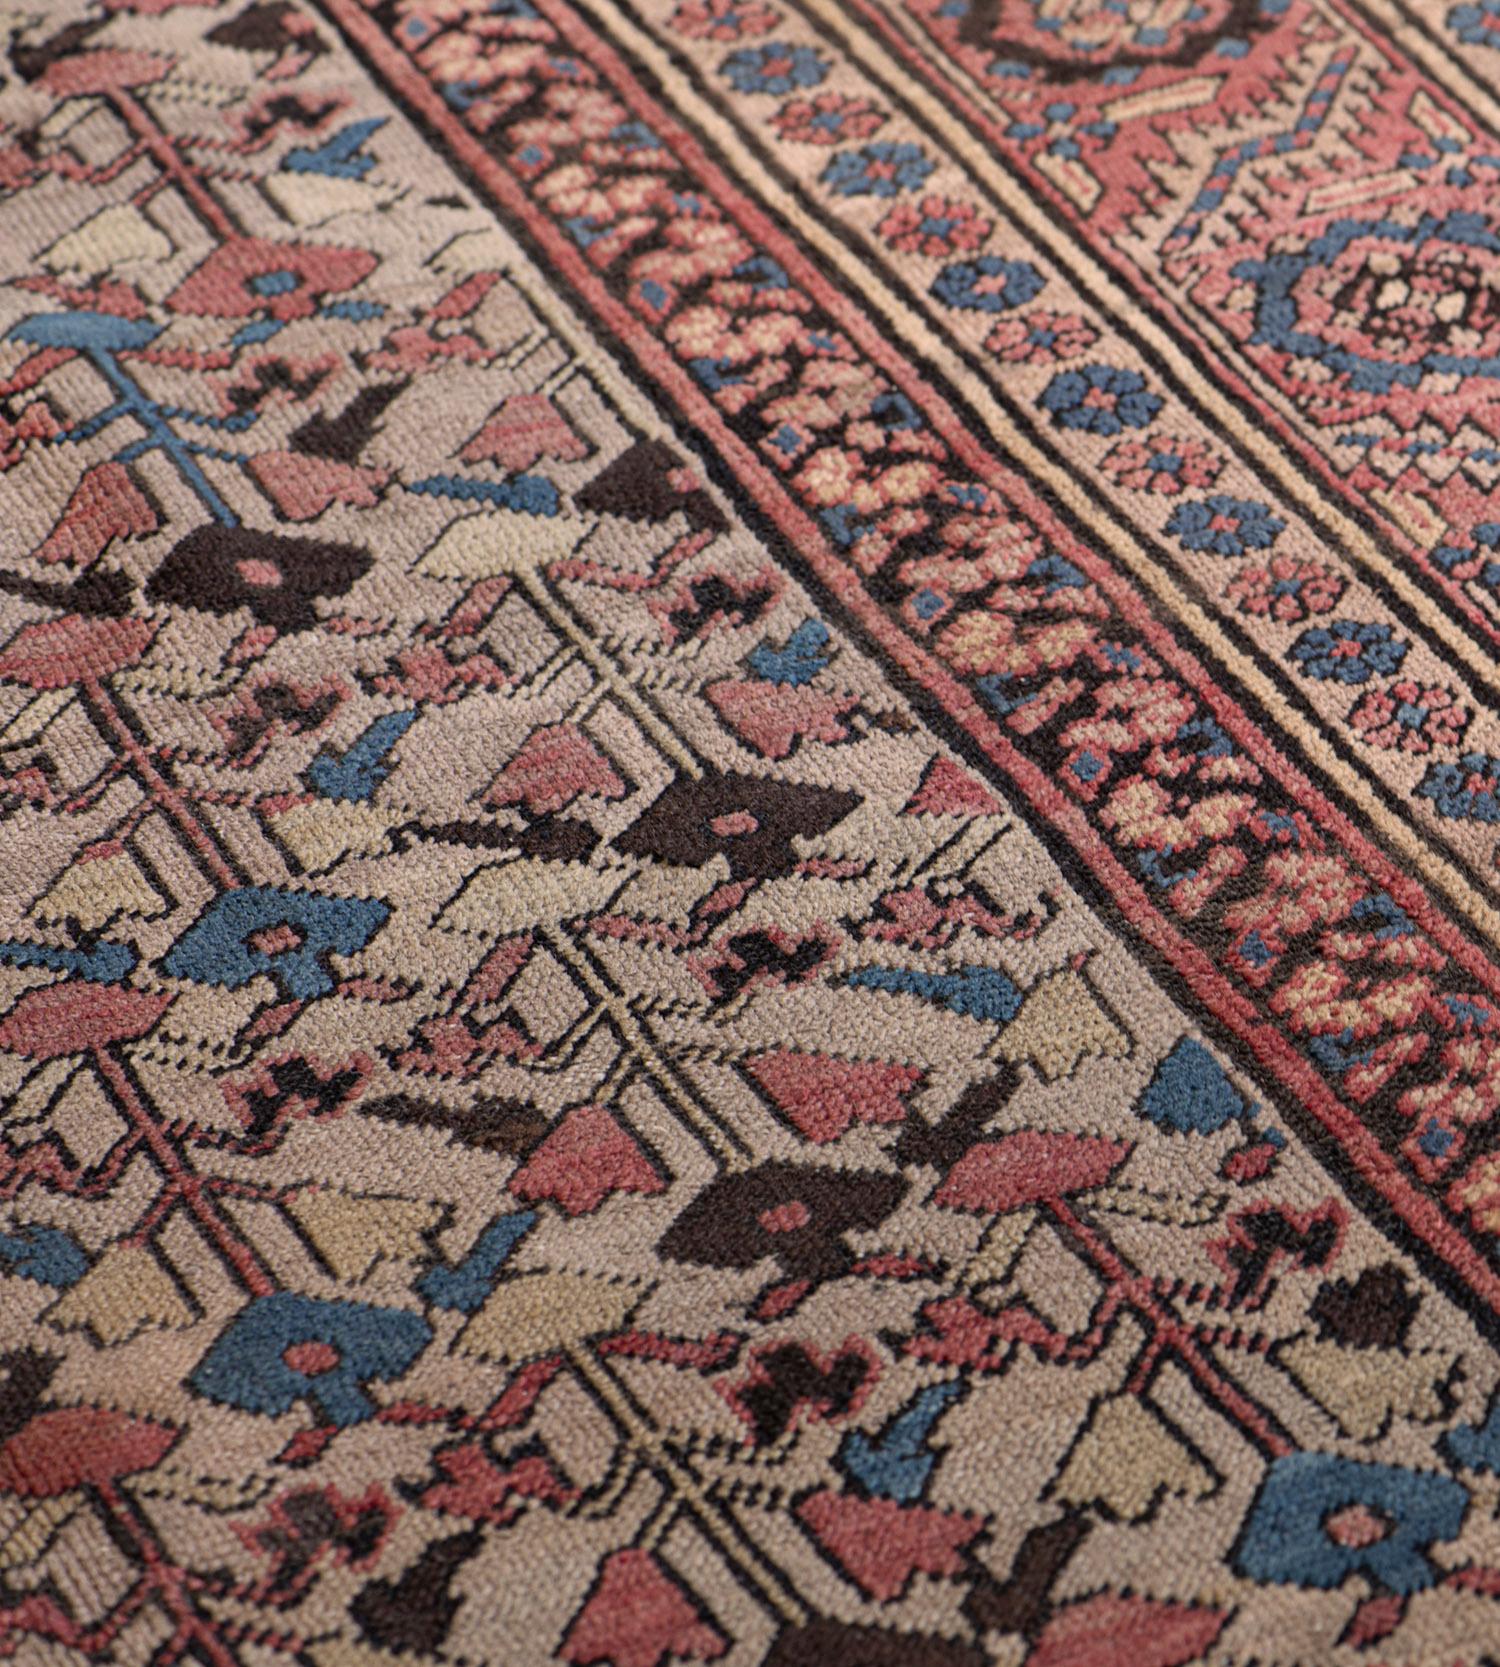 Hand-Woven Late 19th Century Wool Bakhshaish Rug from North West Persia For Sale